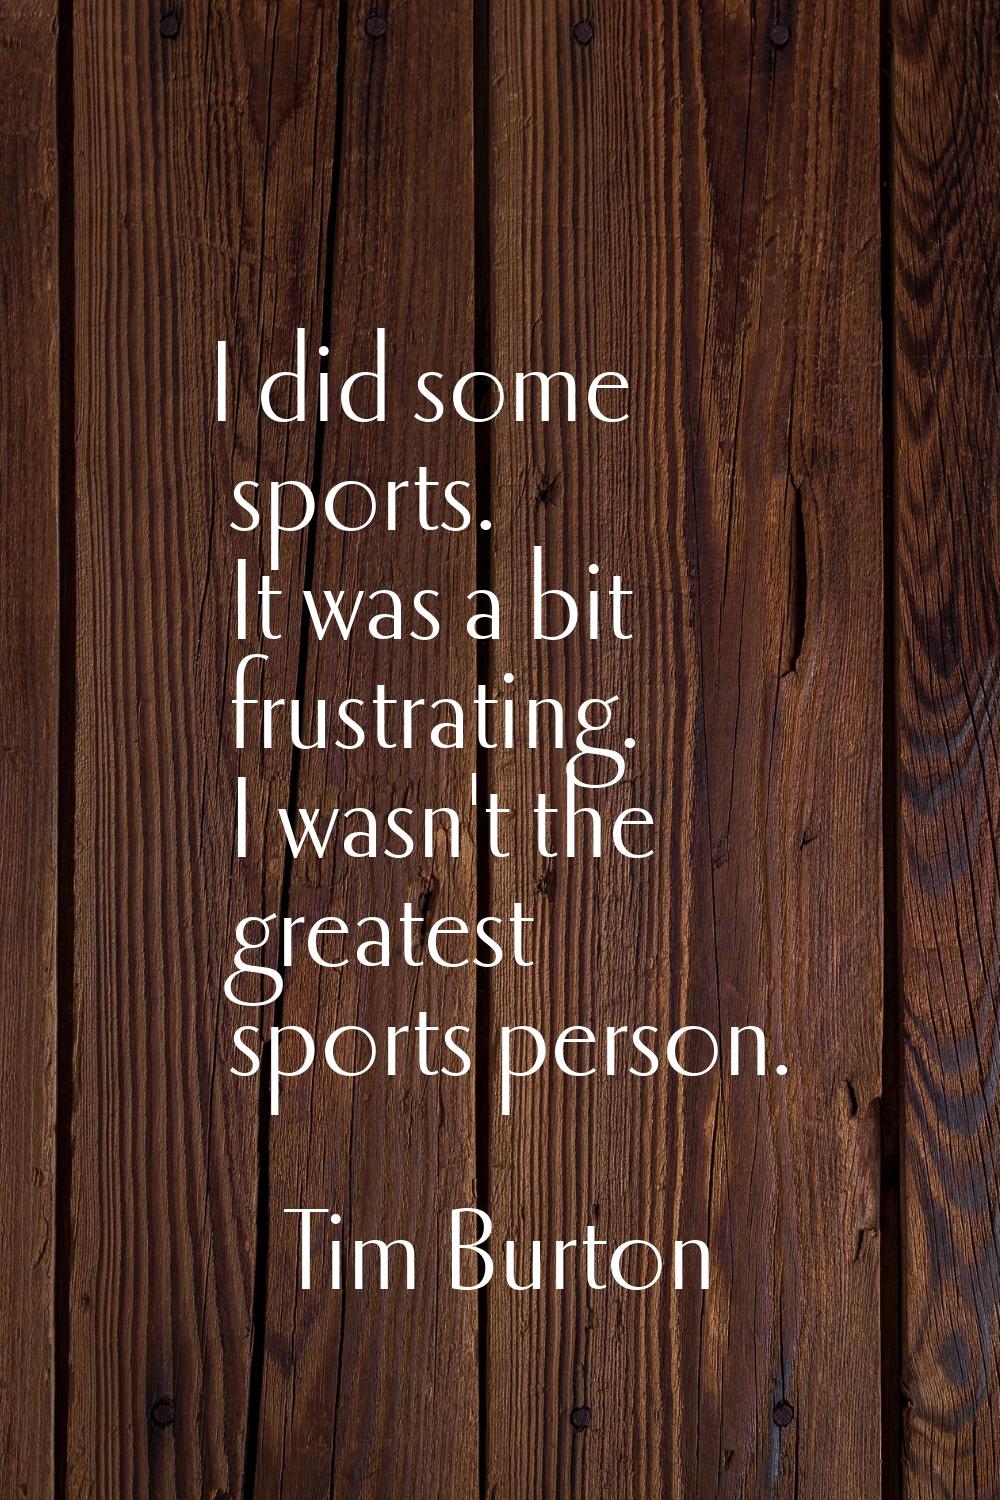 I did some sports. It was a bit frustrating. I wasn't the greatest sports person.